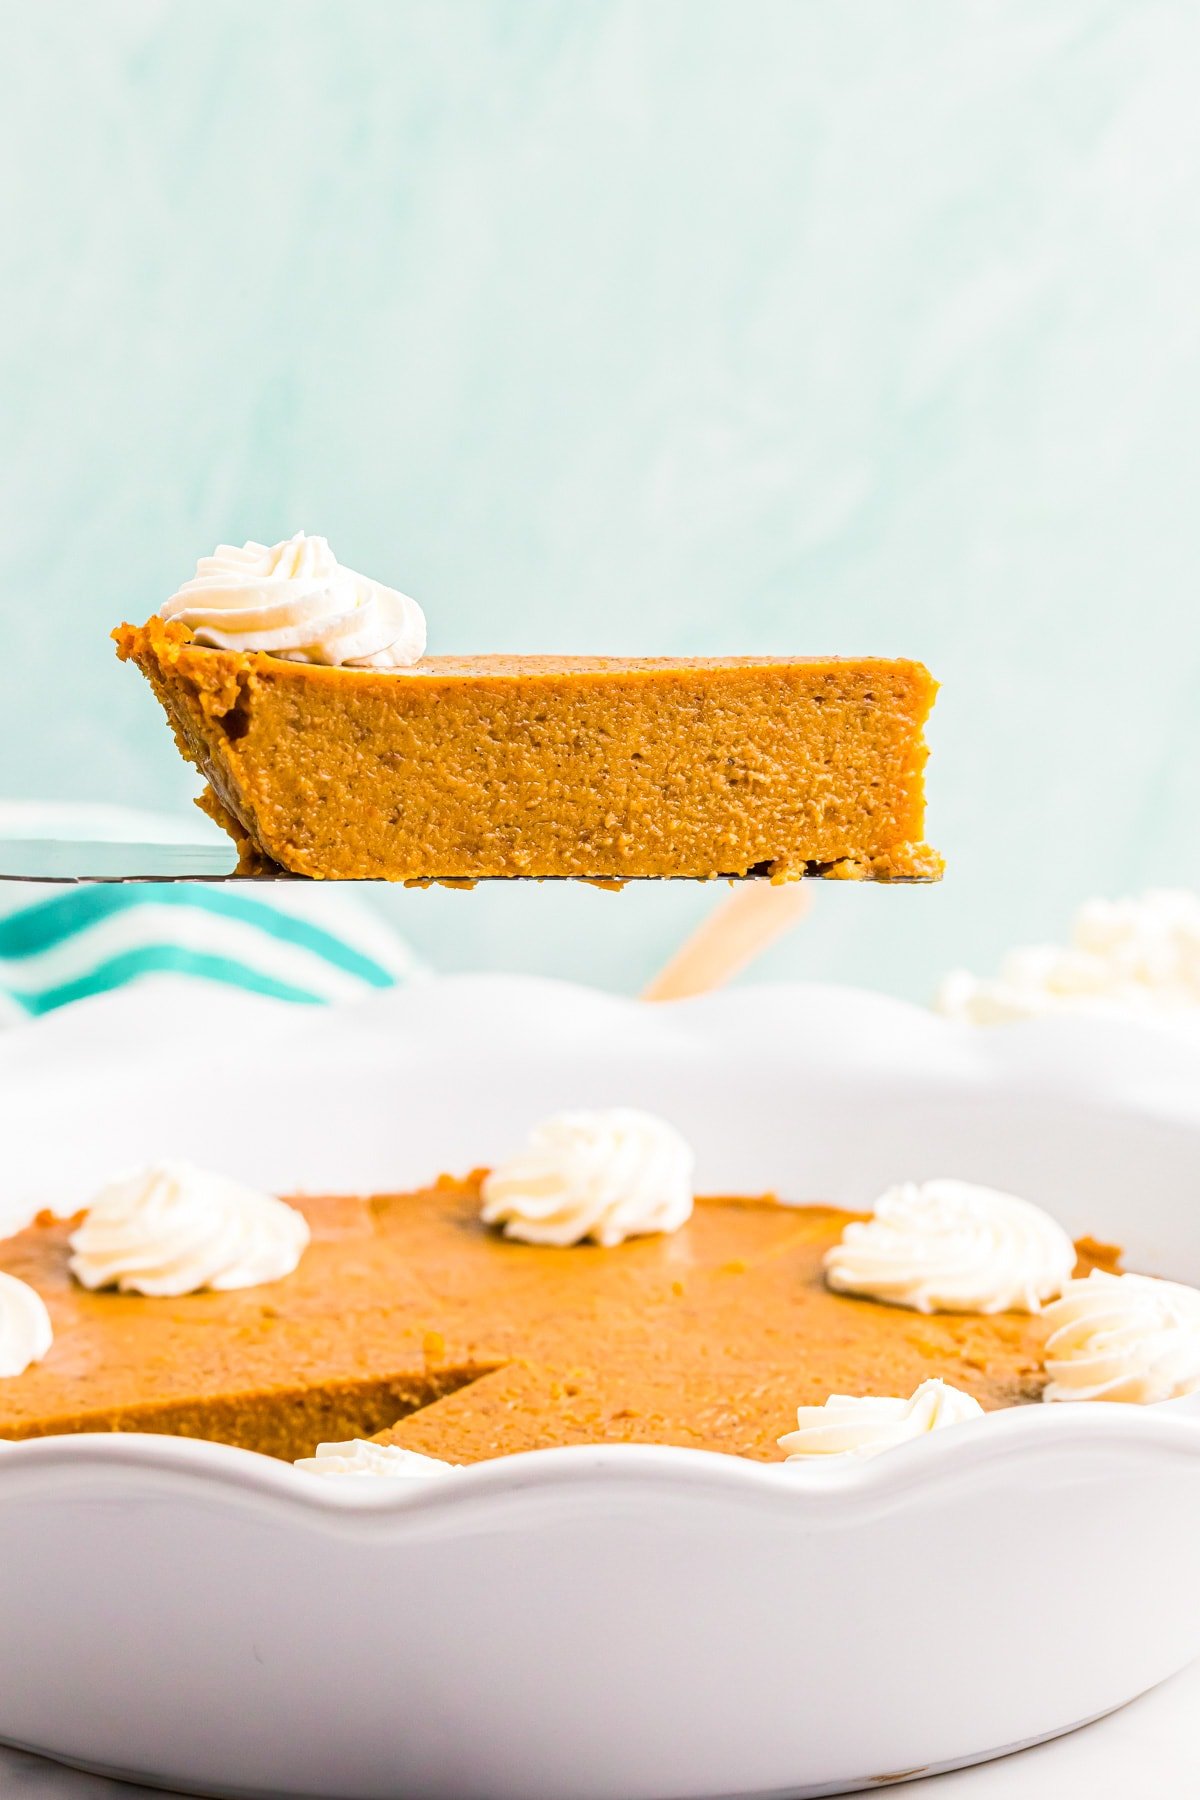 Cutting and removing a slice of crustless pumpkin pie from the pan.